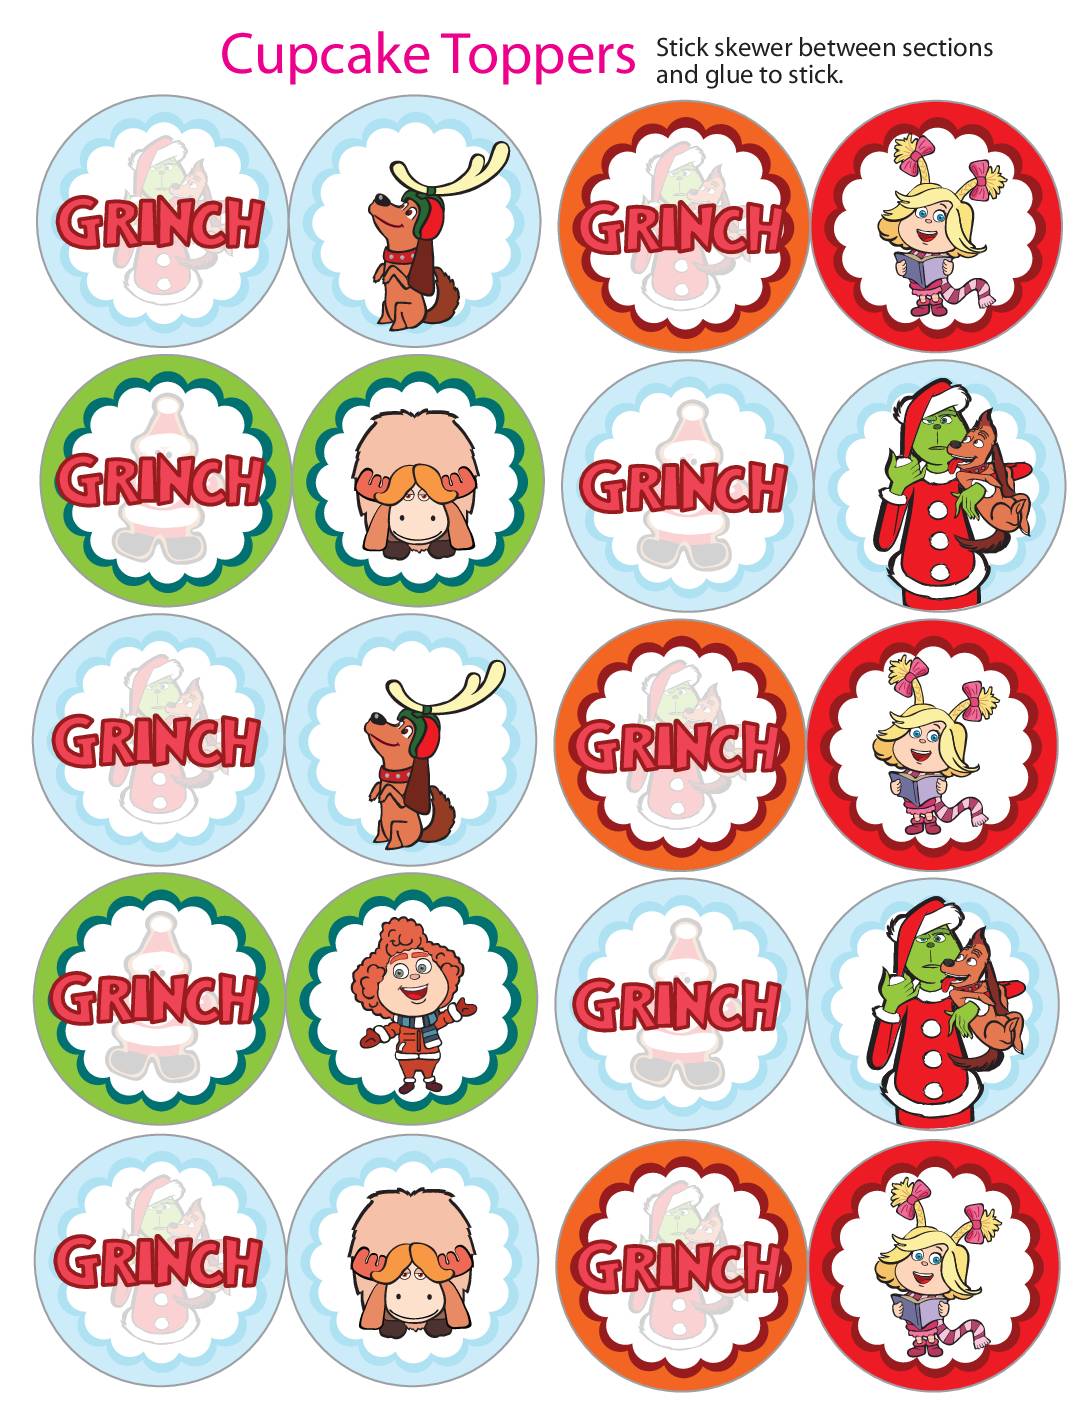 cupcake-toppers-grinch